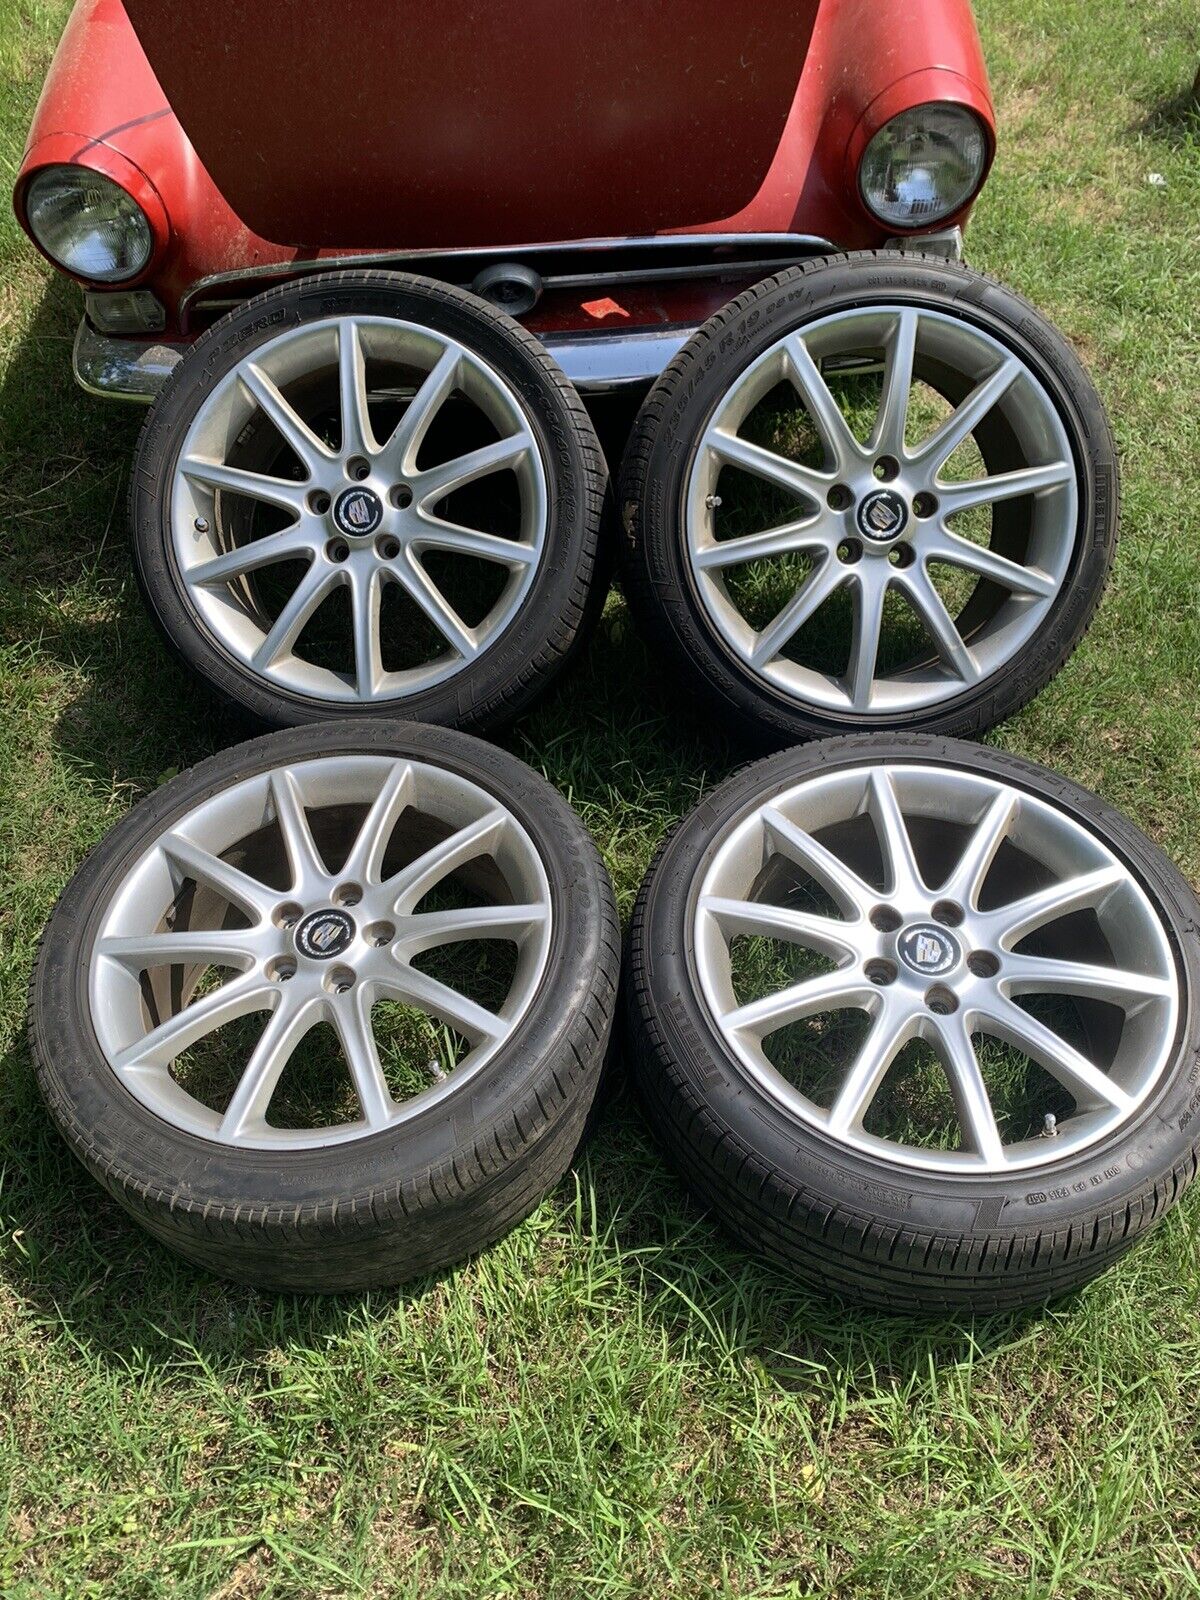 Cadillac Xlr V Wheels, This Is A Set Of 4 With Correct Center Caps